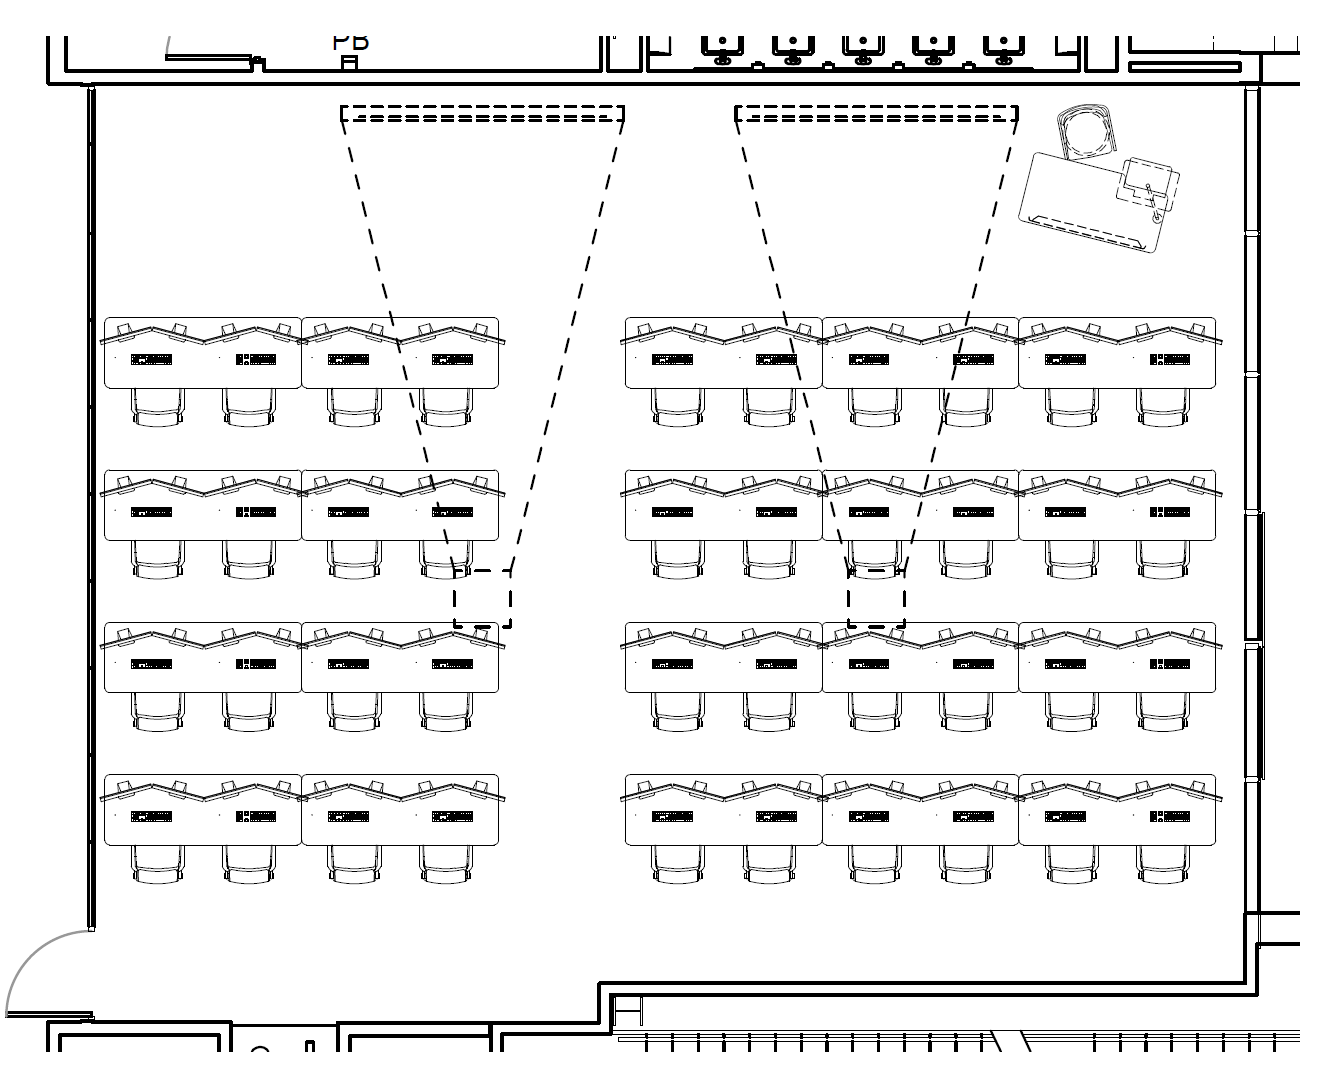 RM 220 Layout